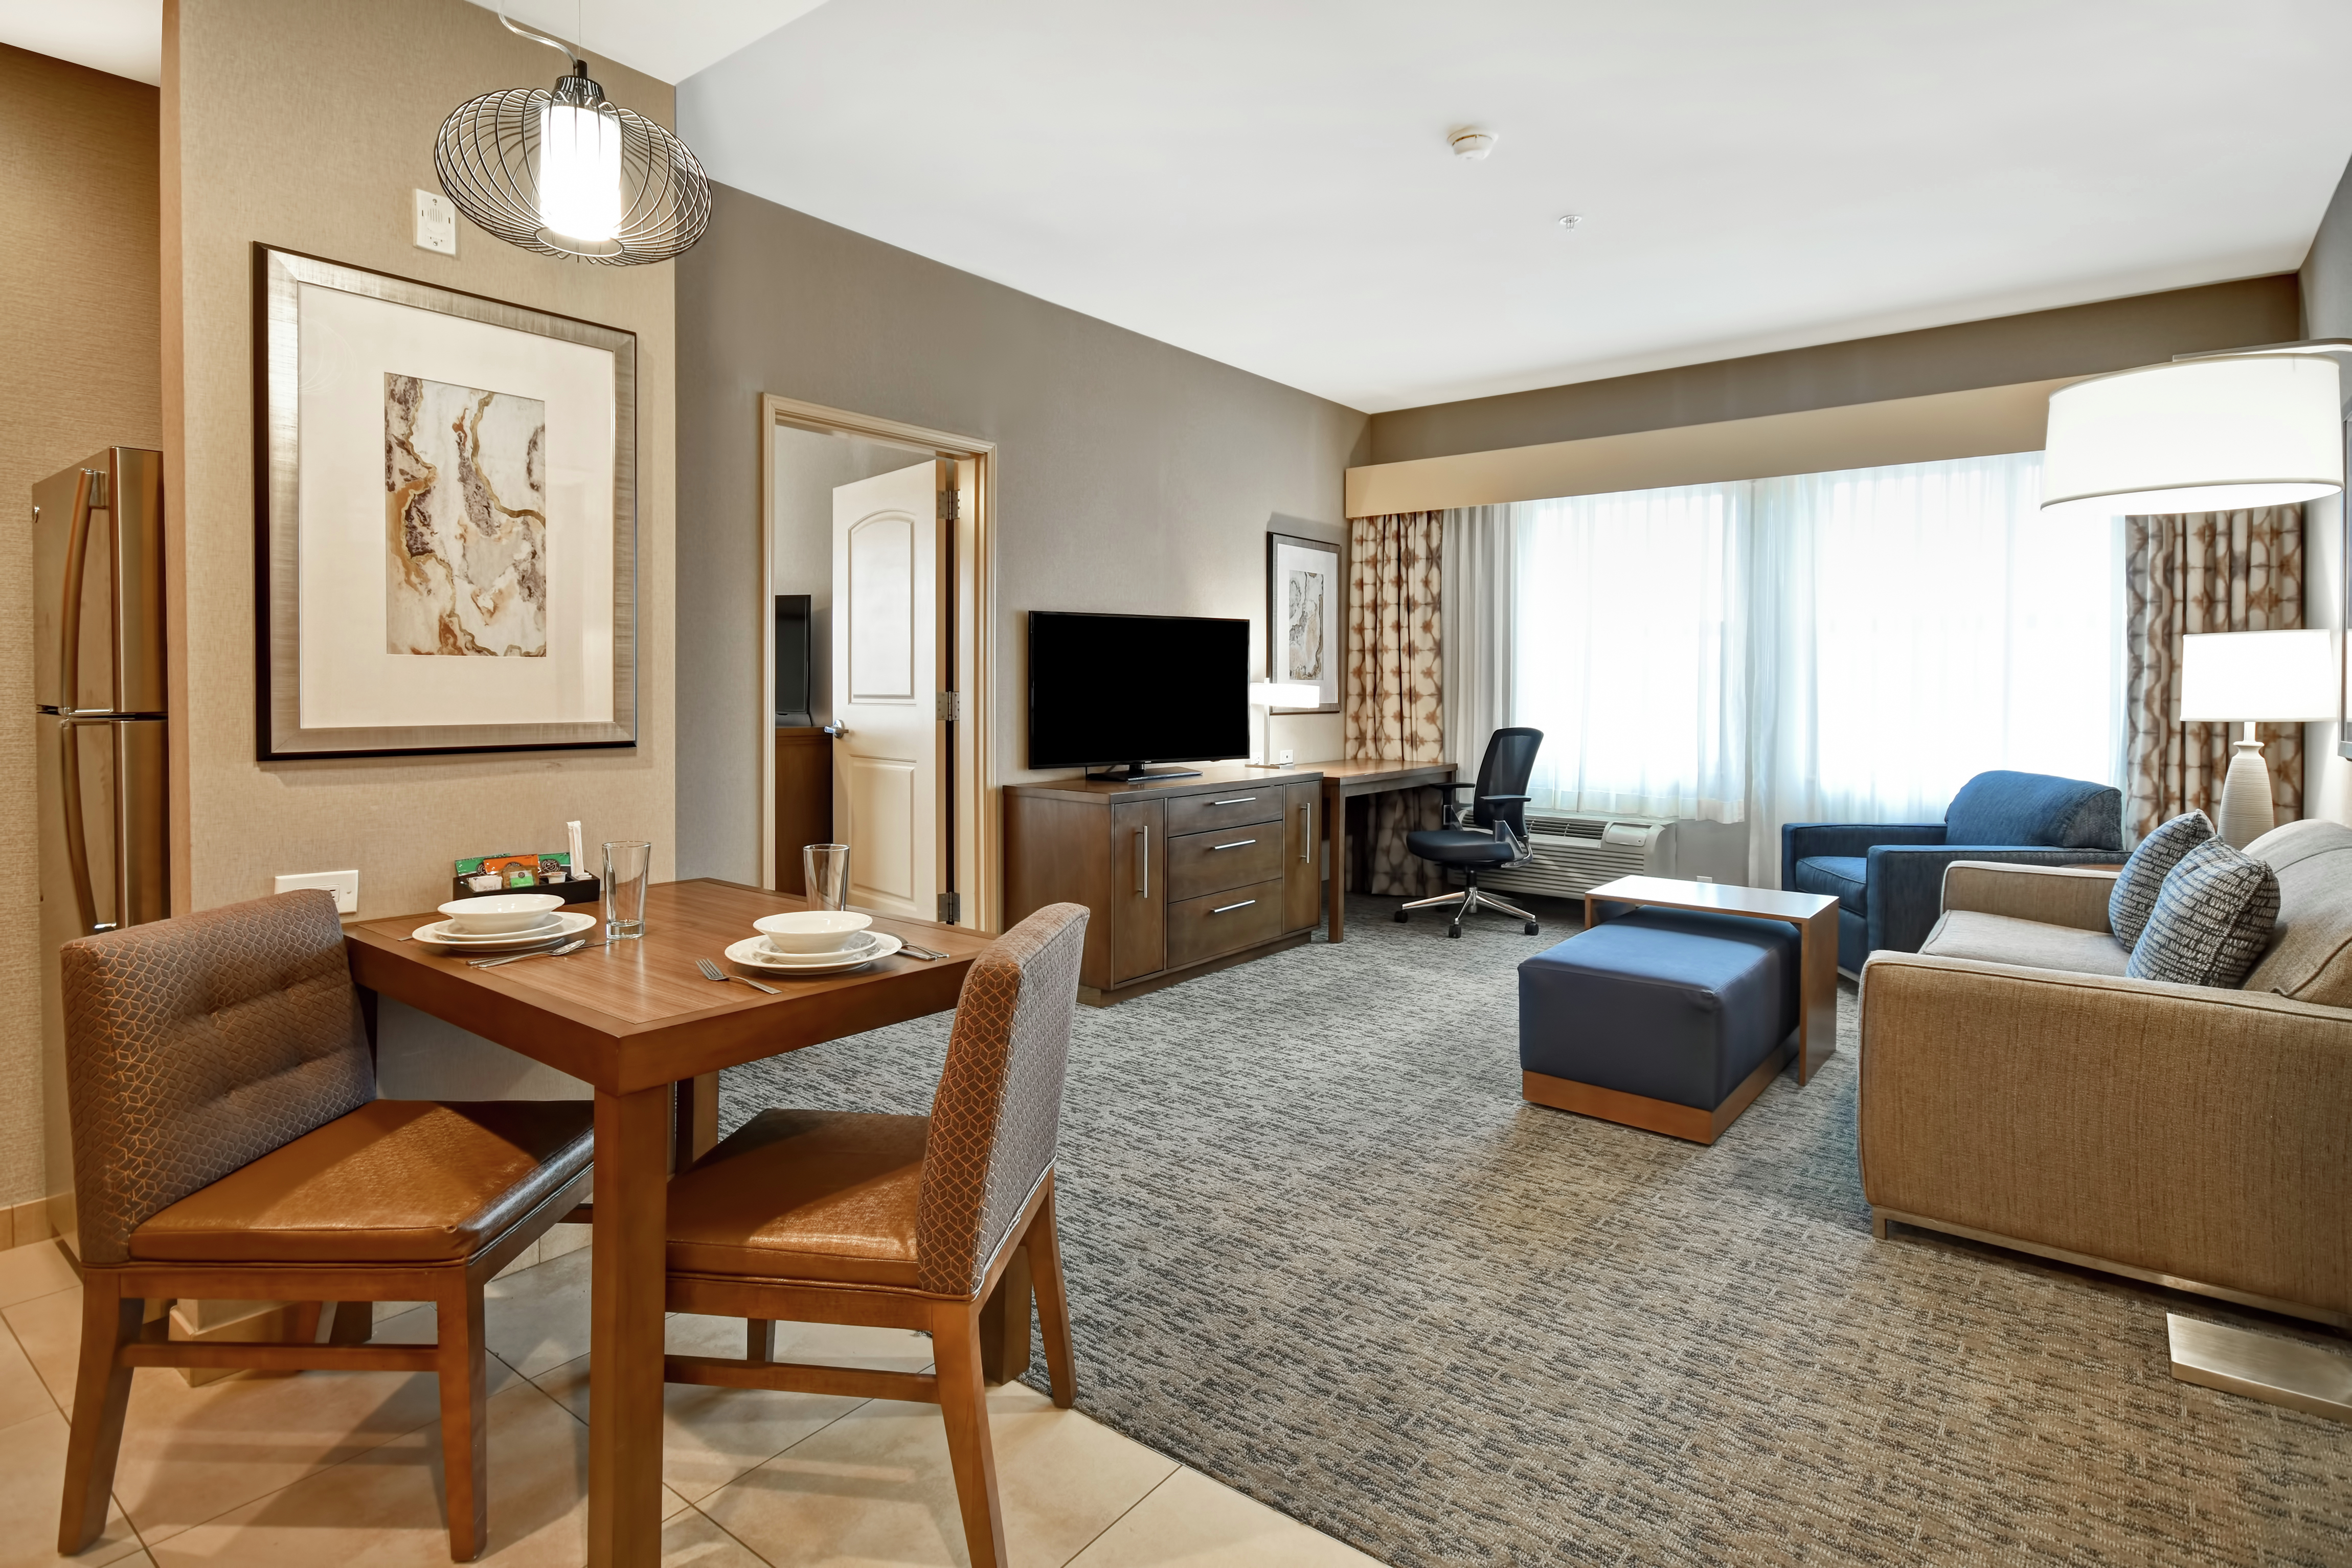 Suite Living Area with Dining Table, Lounge Furniture, TV, and Work Desk